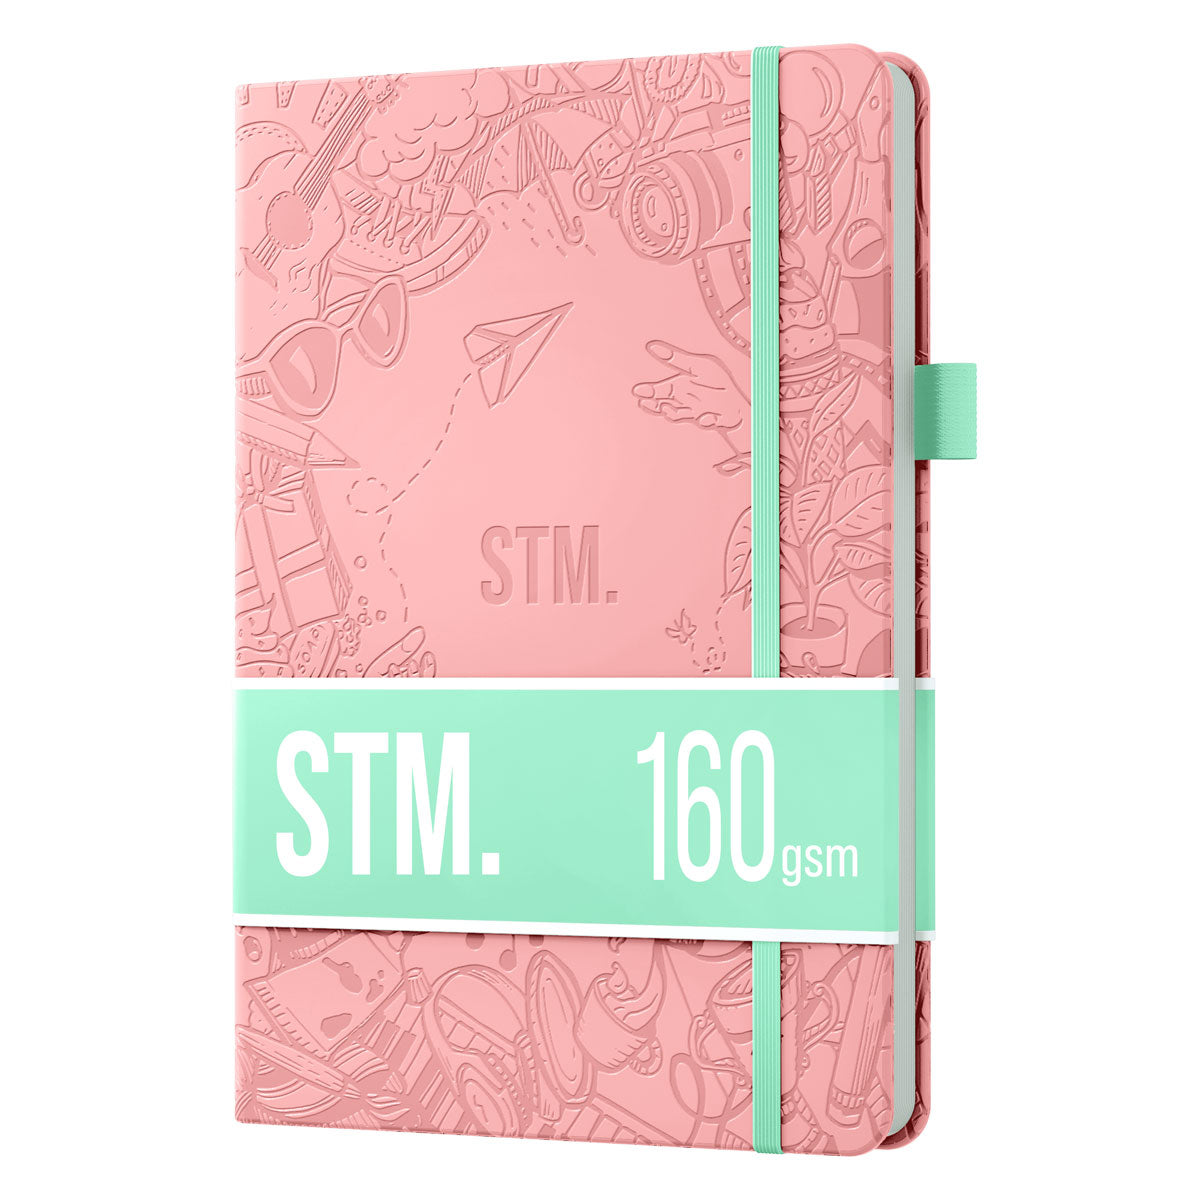  Scribbles That Matter A5 Dotted Journal Notebook + Free Pen!  Your Bullet Dotted Journal Vegan Hard Cover 160gsm Dotted Notebook  Bleedproof thick paper with 150 Pages for Work (5.75 x